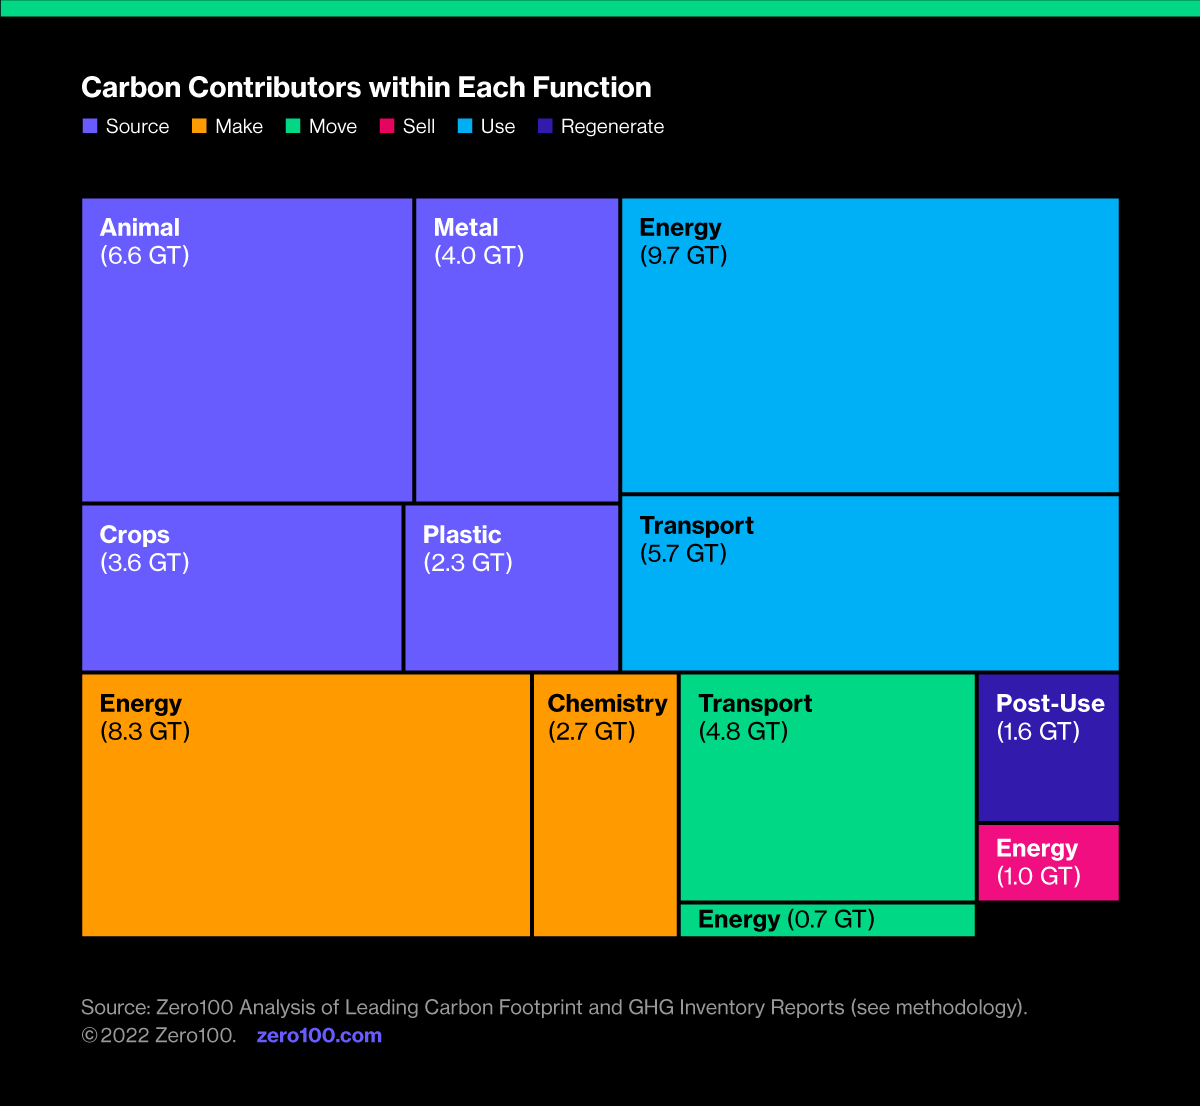 Graph depicting carbon contributors within each function. Source: Zero100 Analysis of Leading Carbon Footprint and GHG Inventory Reports. 